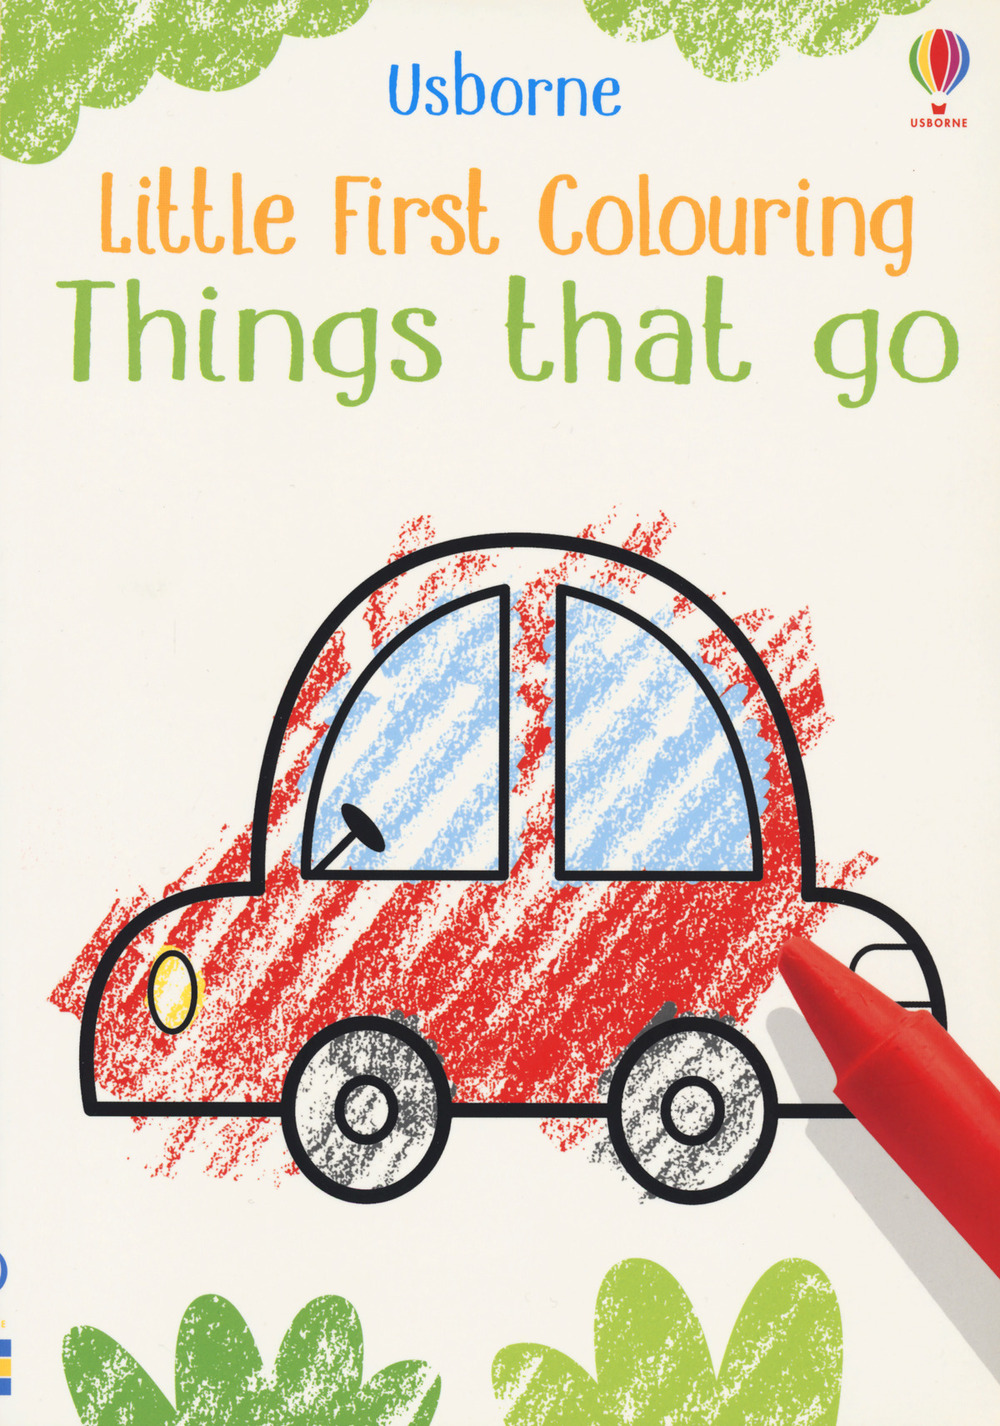 Things that go. Little first colouring